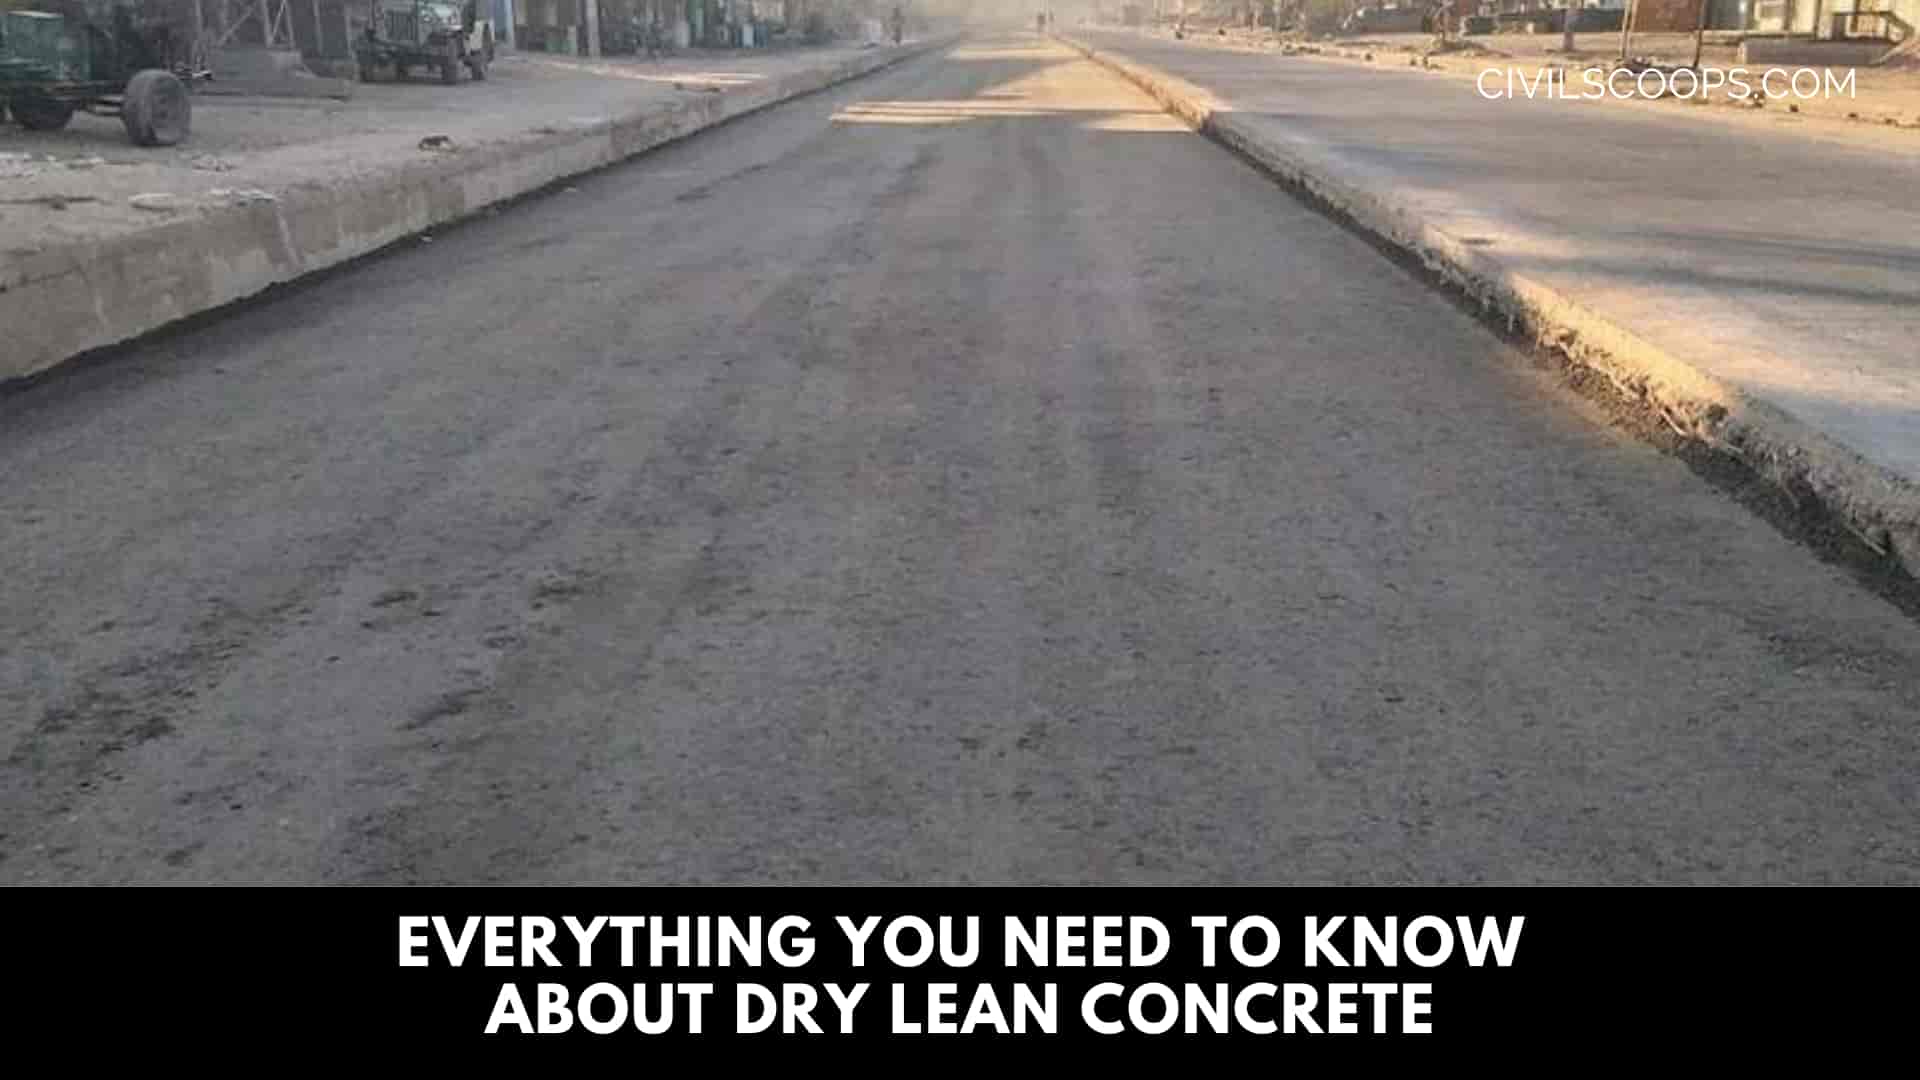 Everything You Need to Know About Dry Lean Concrete